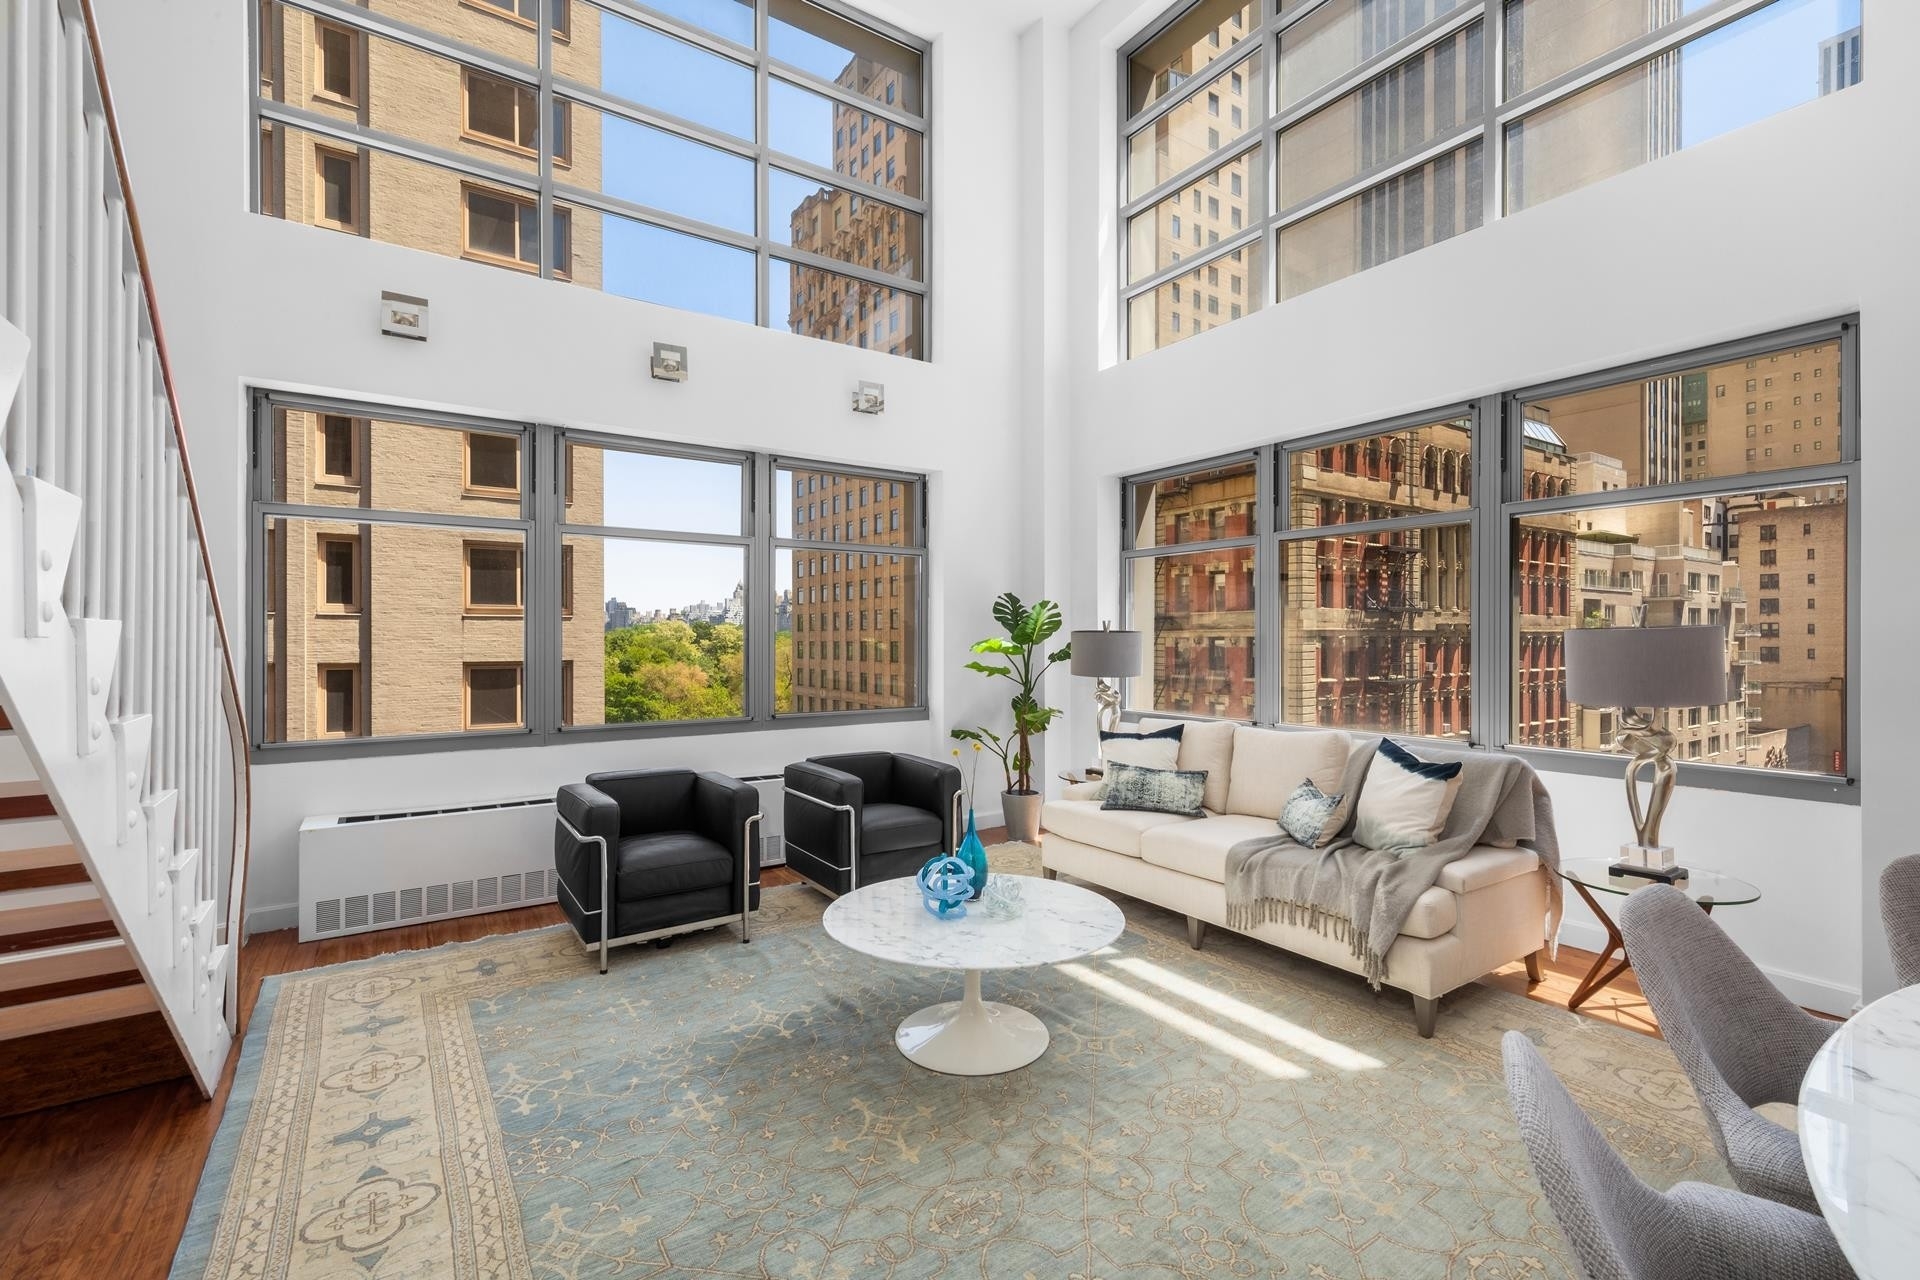 Condominium for Sale at 100 W 58TH ST, 8D Midtown West, New York, New York 10019